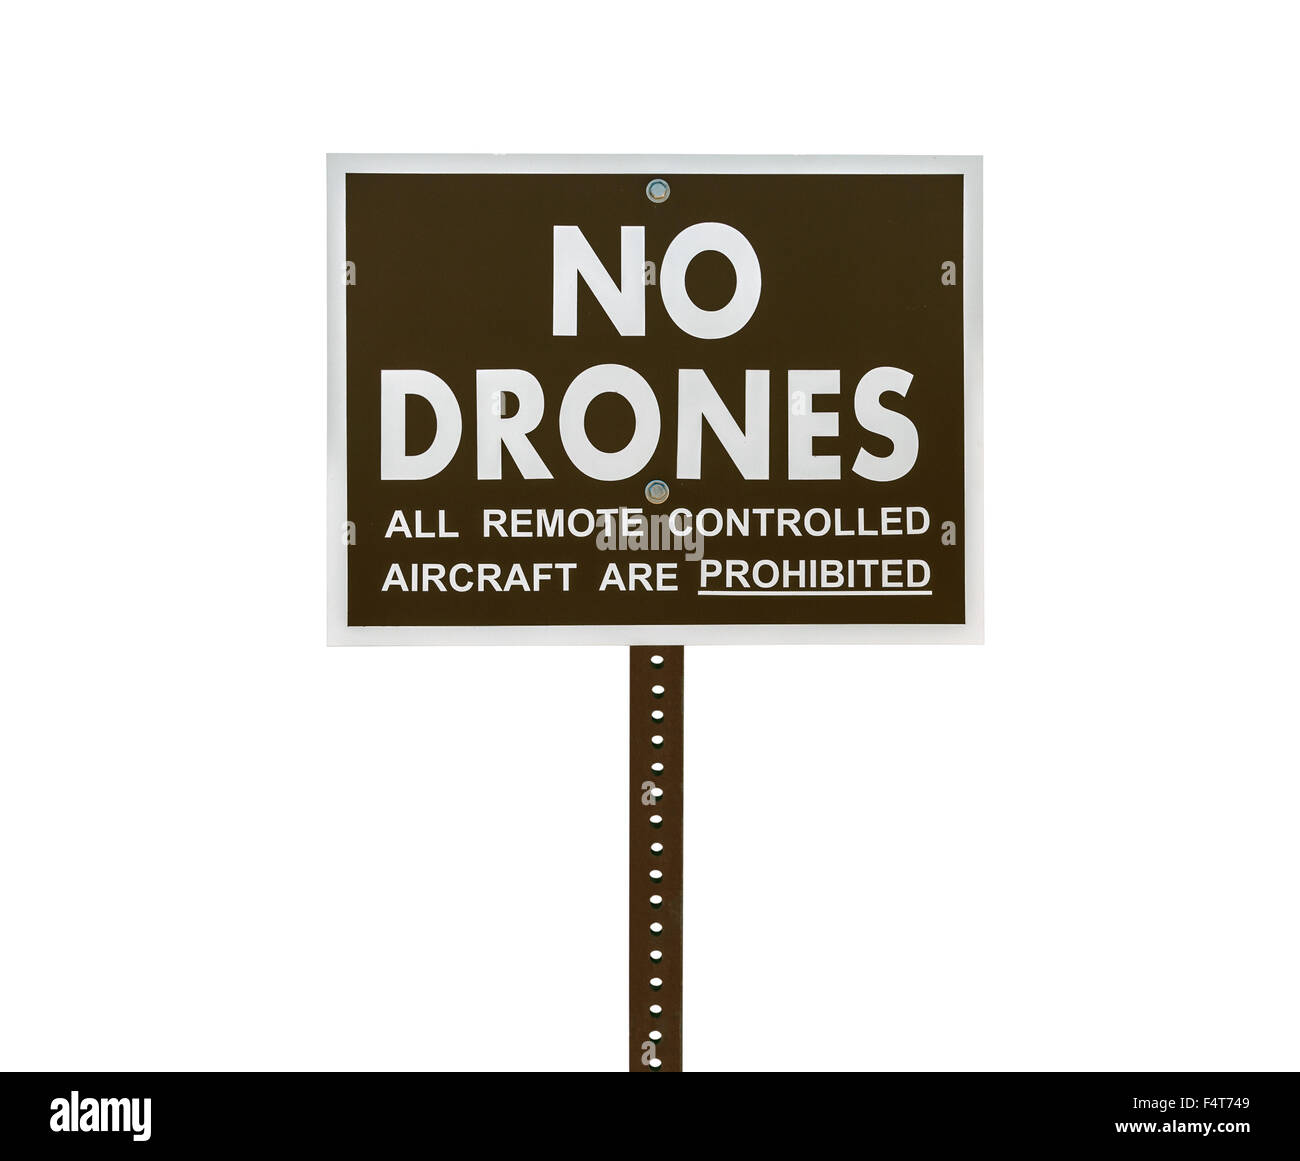 No drones all remote controlled aircraft are prohibited sign isolated with clipping path. Stock Photo